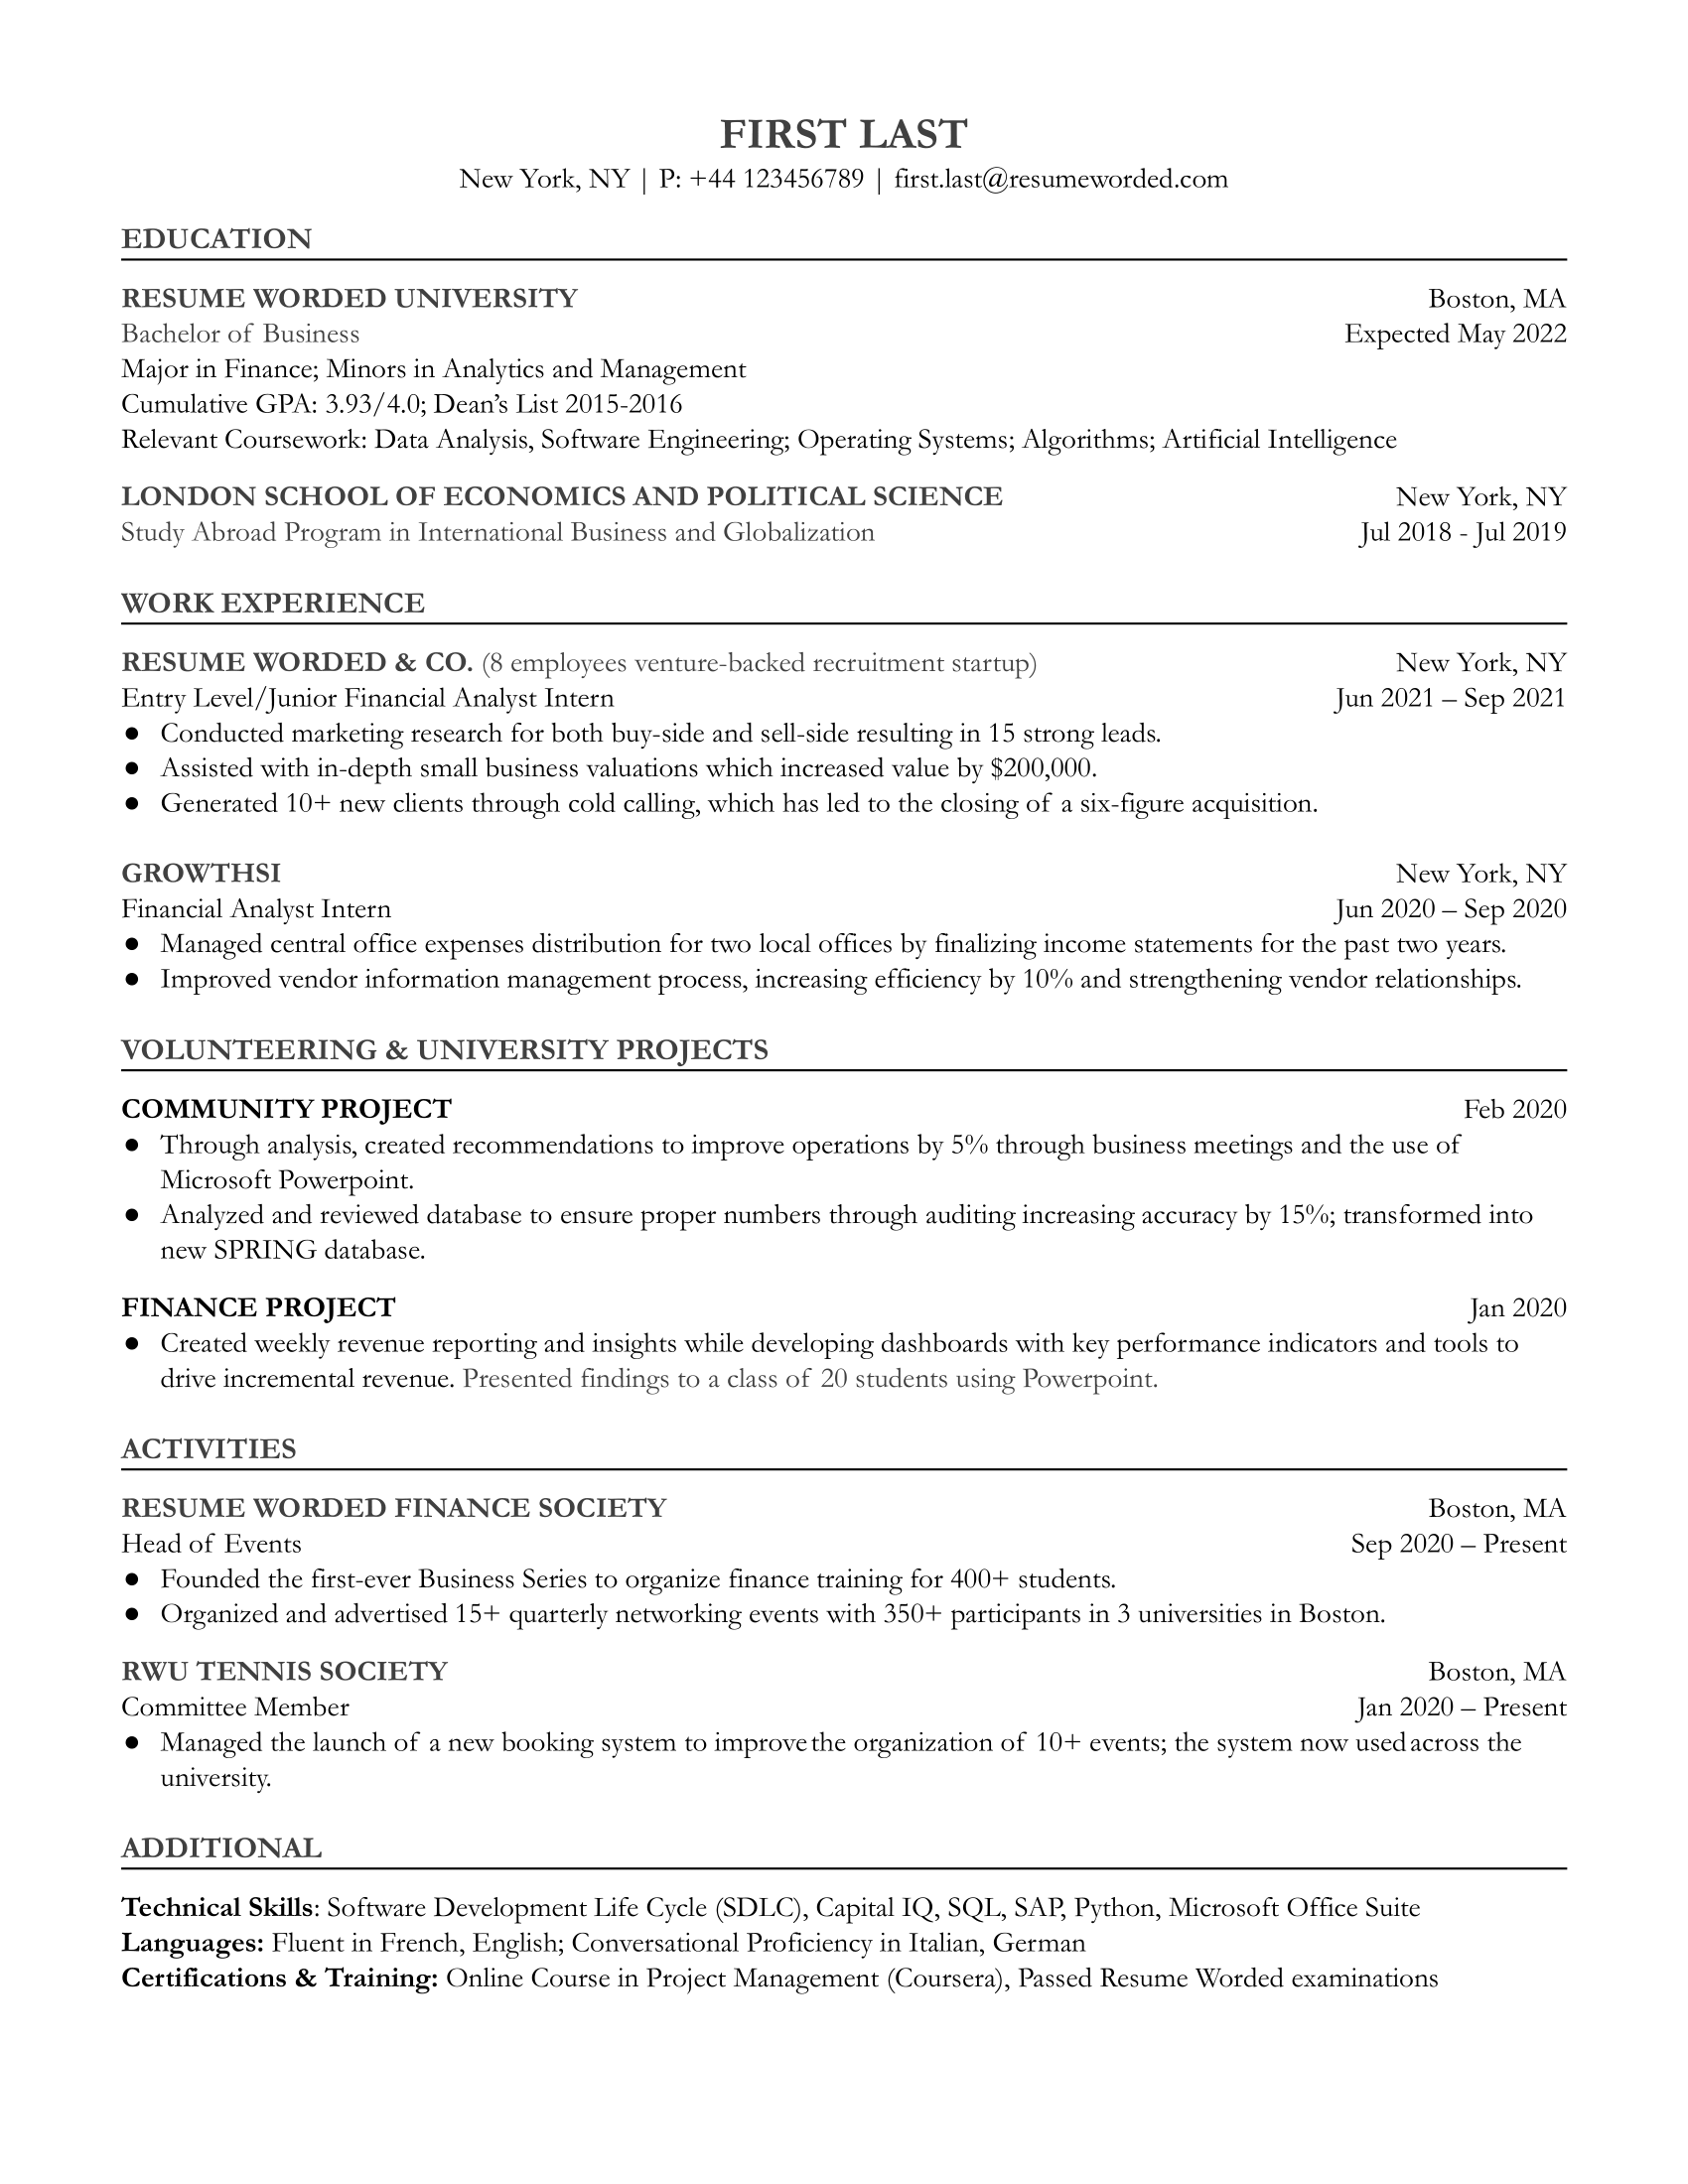 A resume screenshot highlighting skills and experience relevant for an Entry Level/Junior Financial Analyst role.